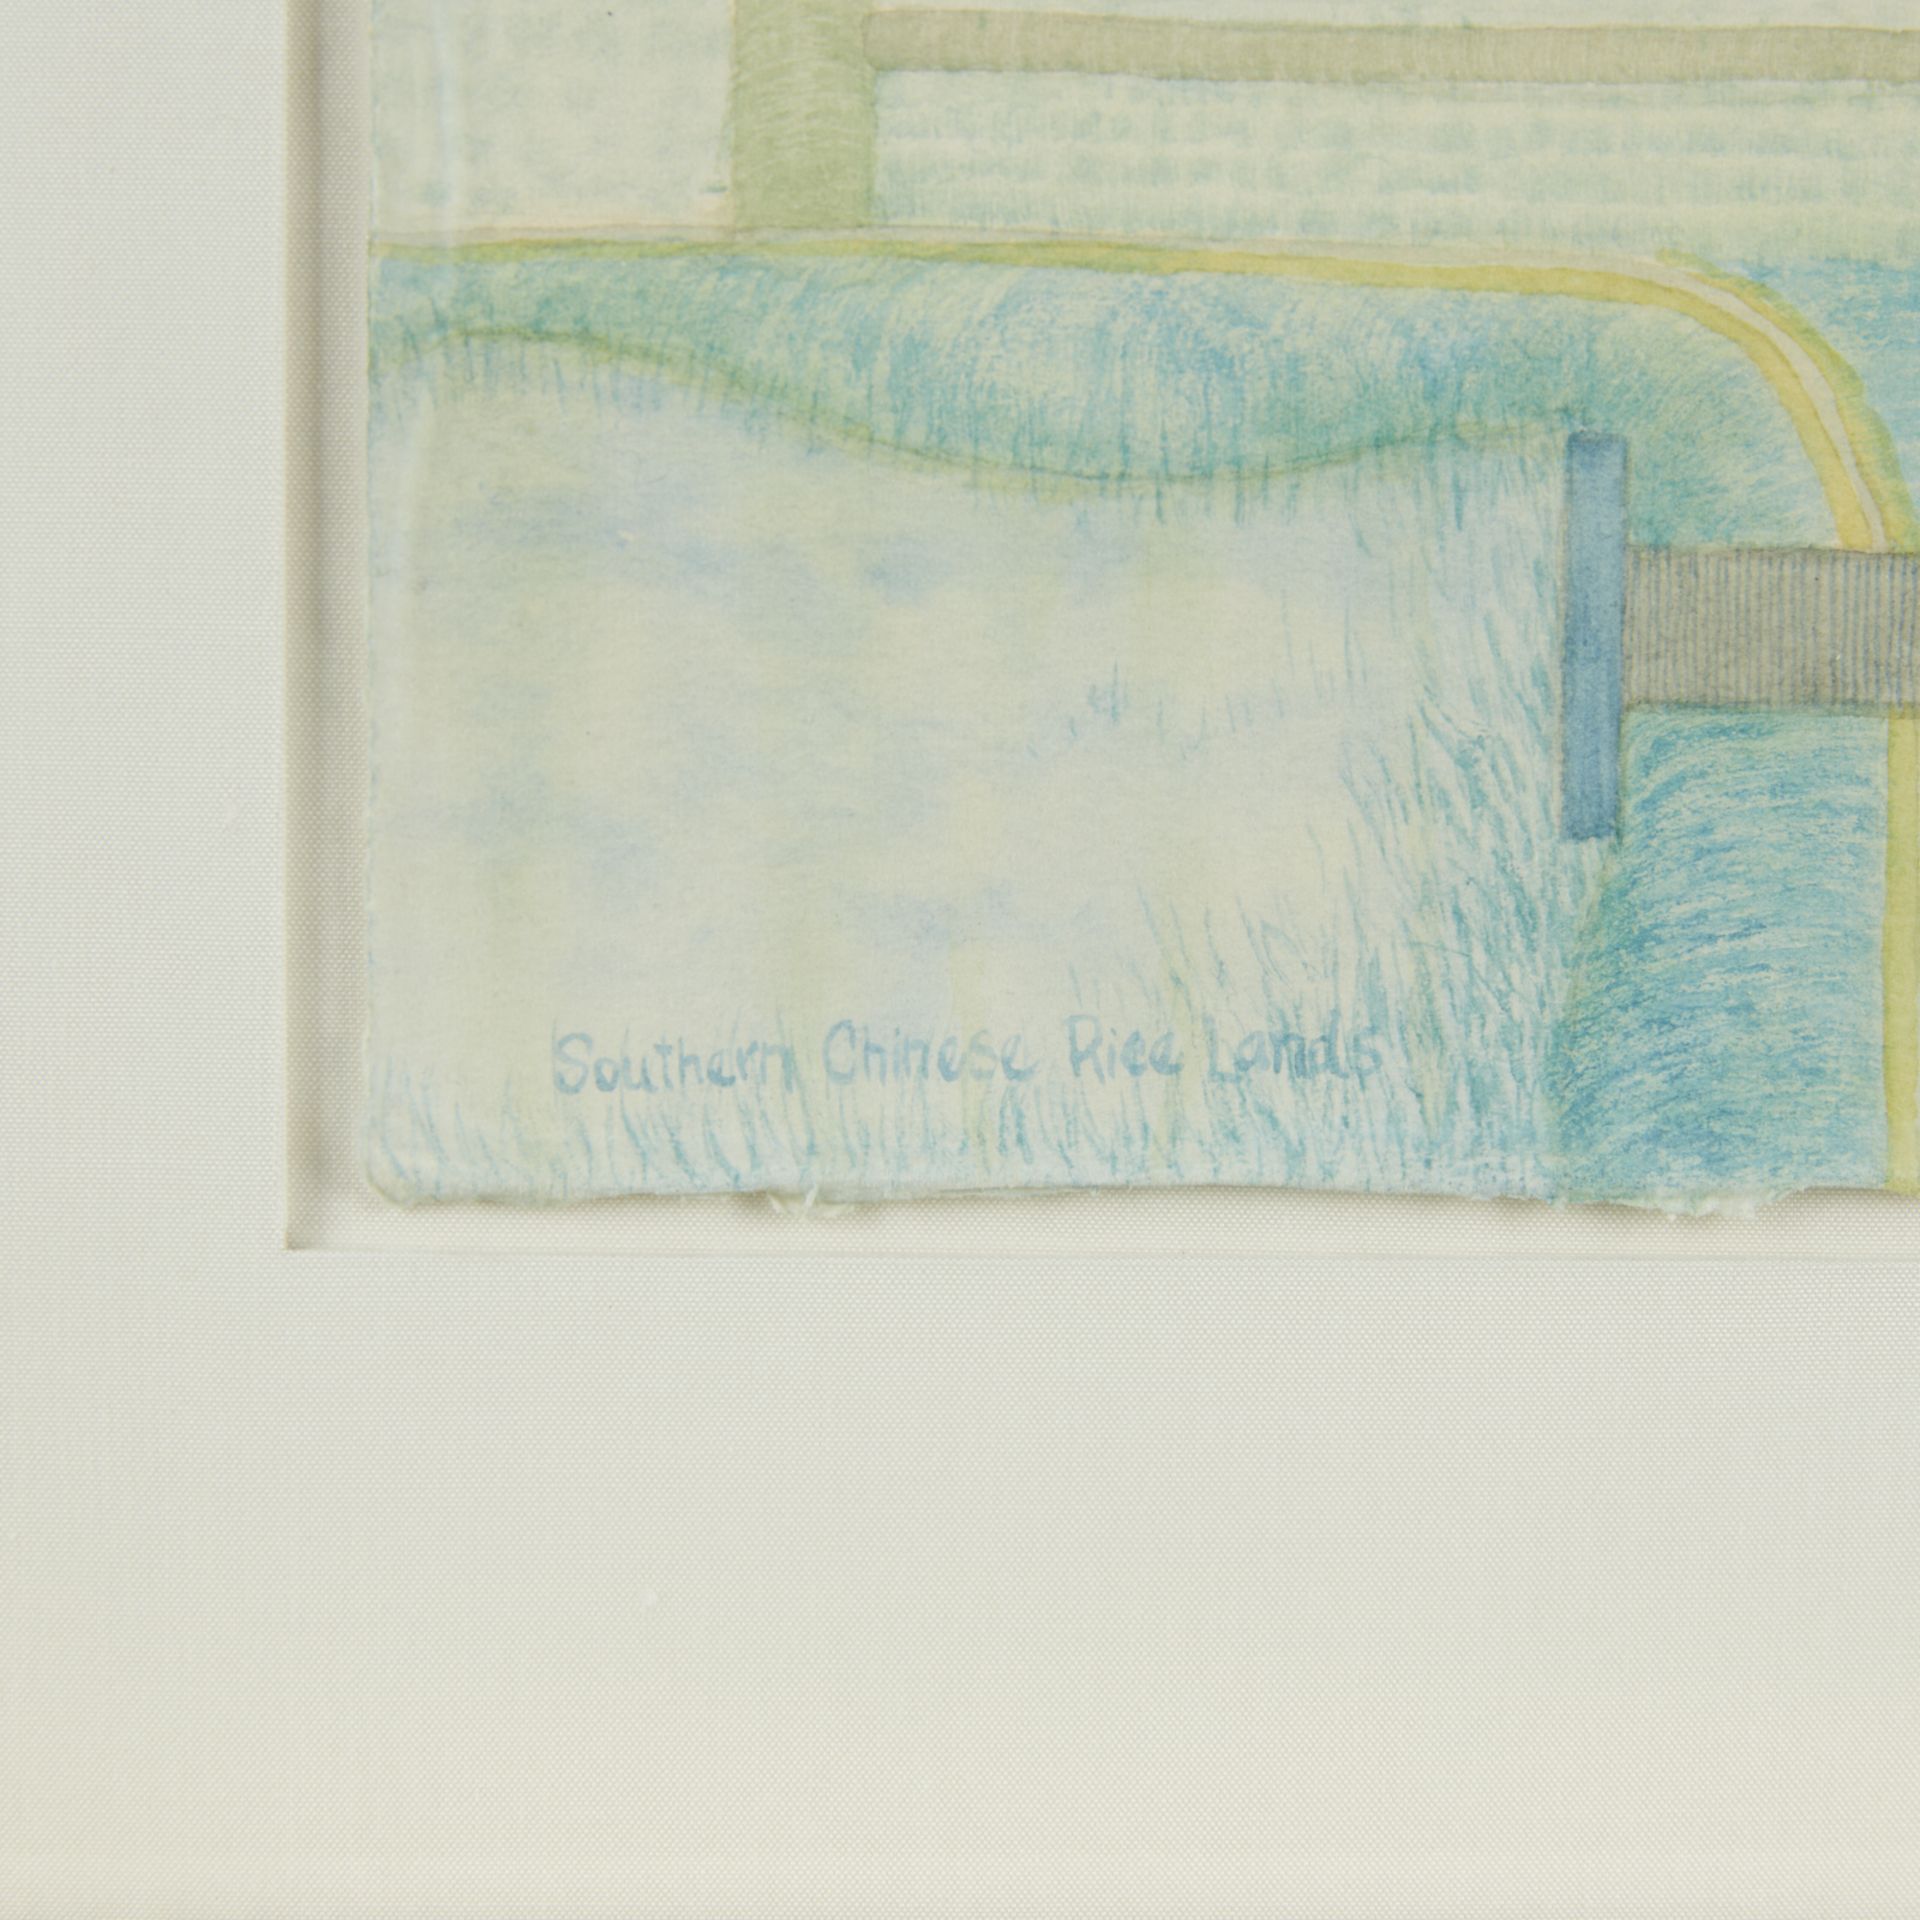 Claire A. Khalil "S. Chinese Rice Lands" Painting - Image 3 of 7